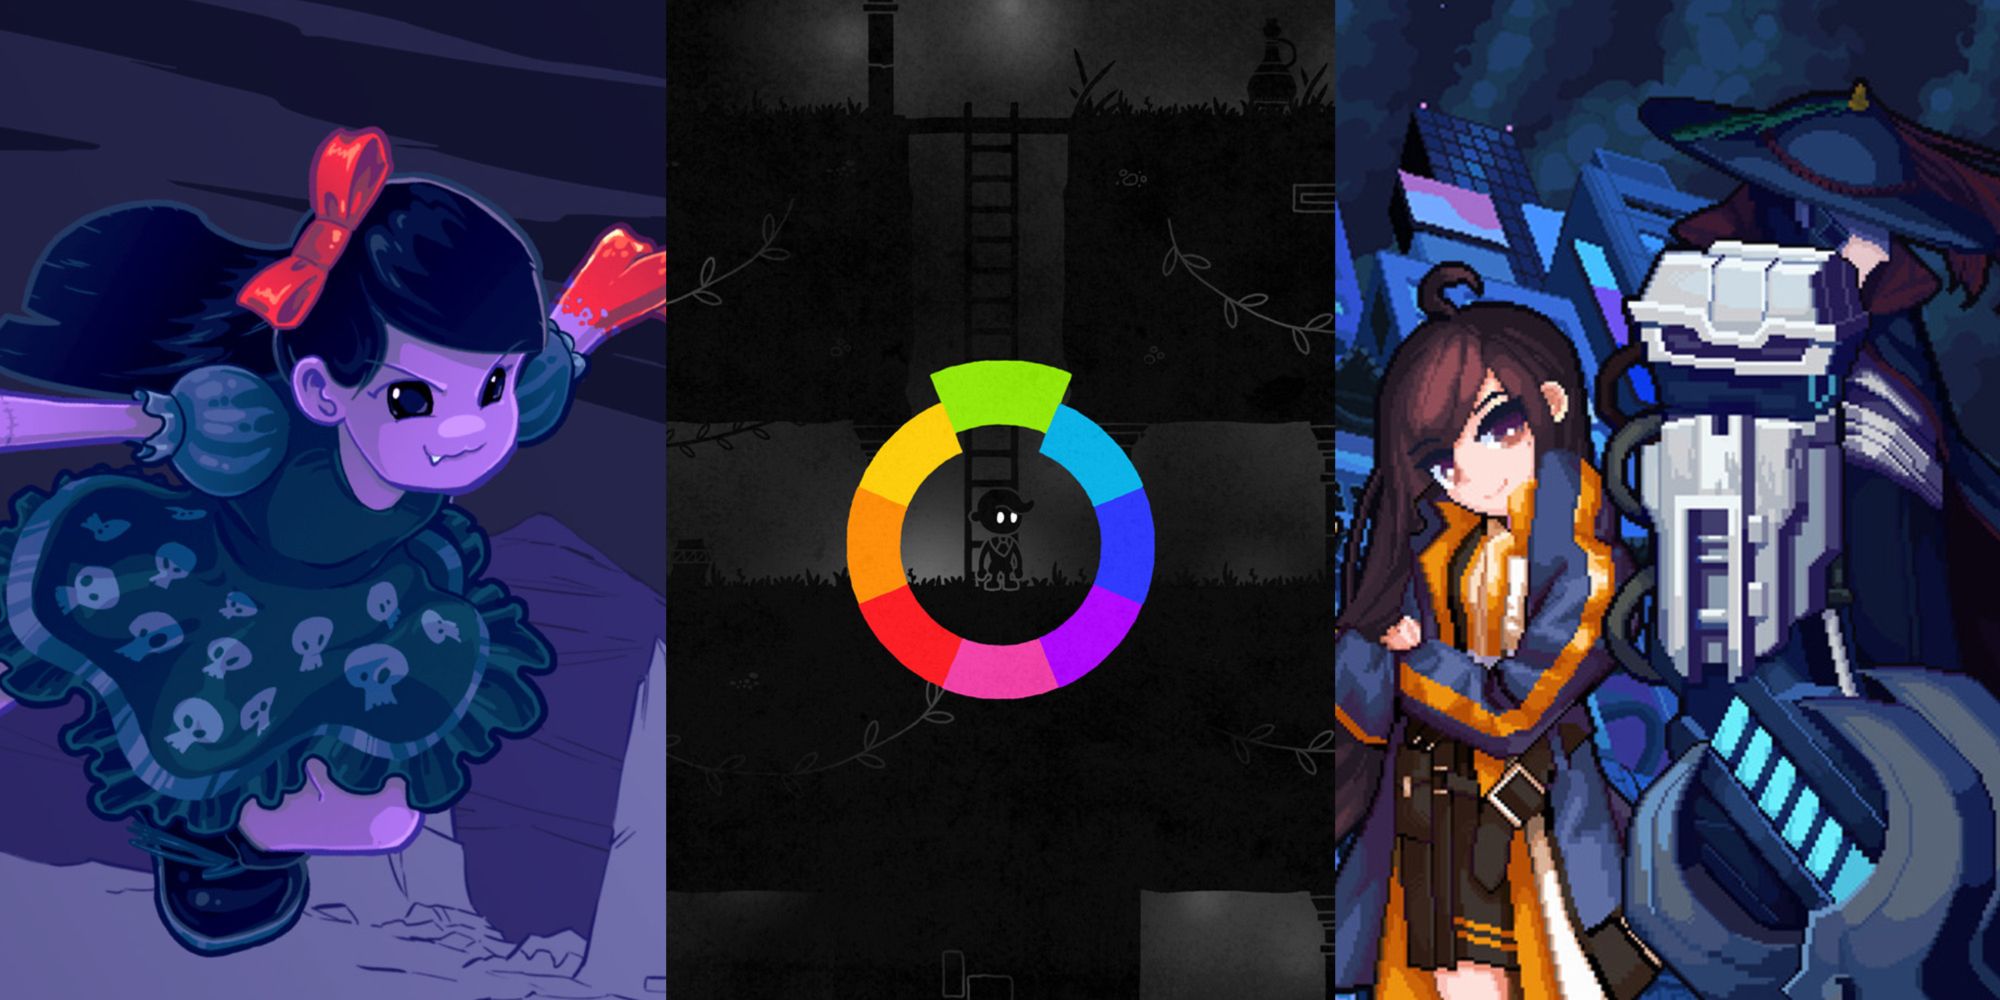 Collage of They Bleed Pixels, Hue, and SANABI